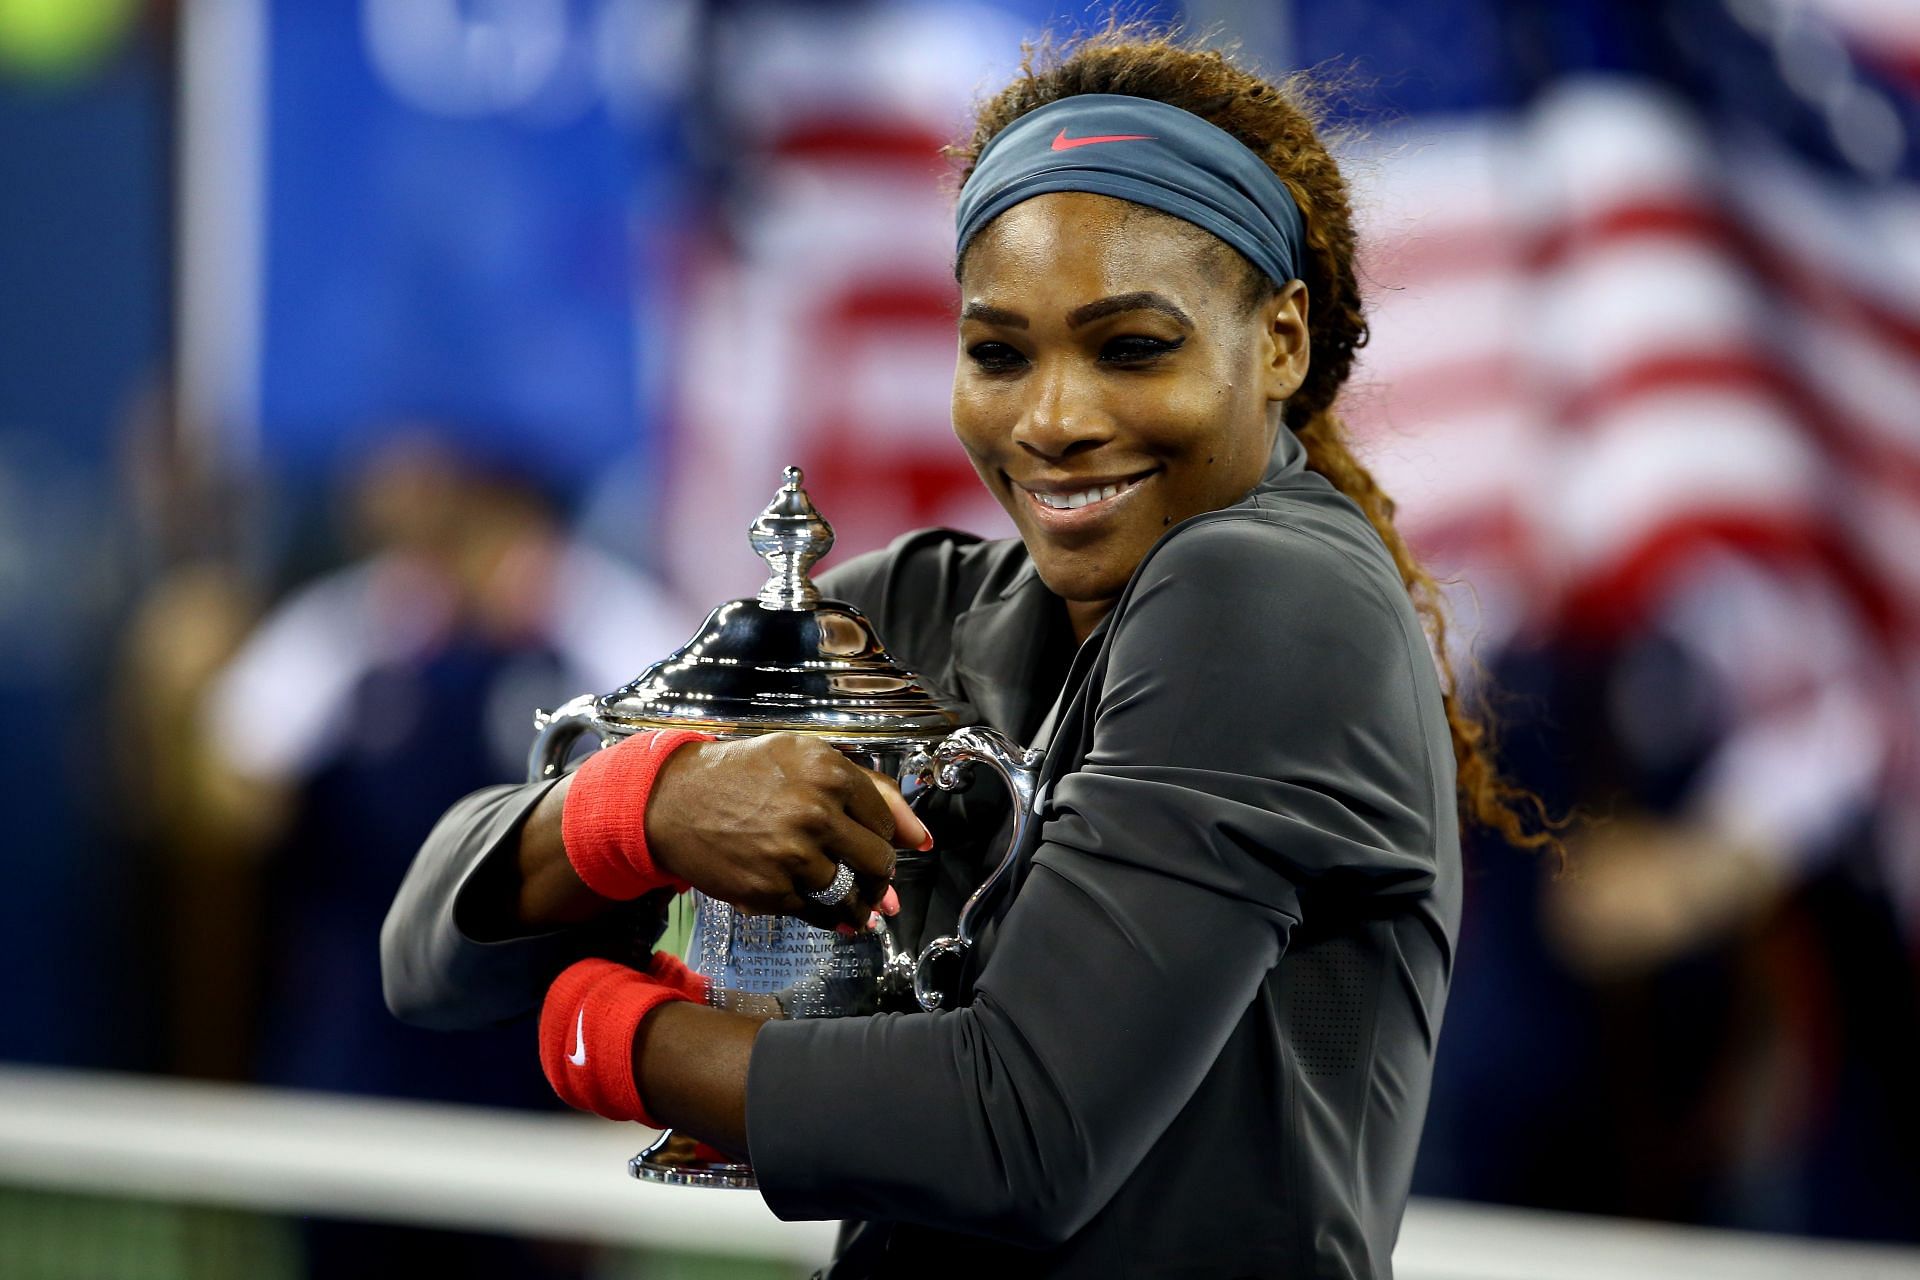 Serena Williams at the 2013 US Open.